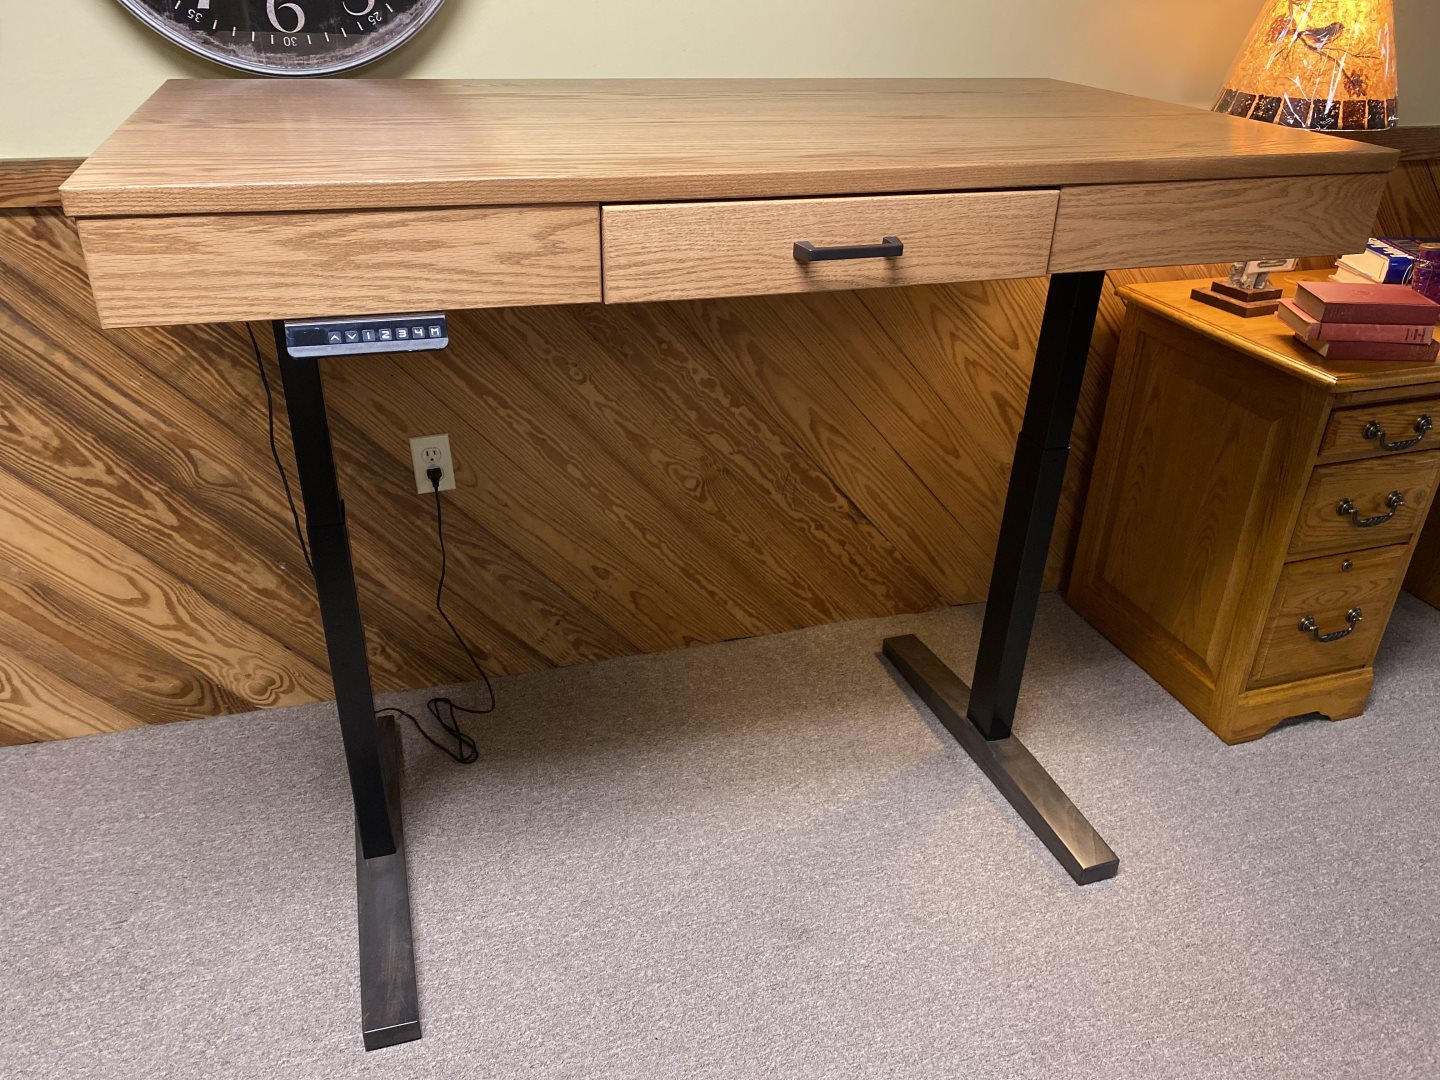 Valley Furniture - Urbana Sit and Stand Desk